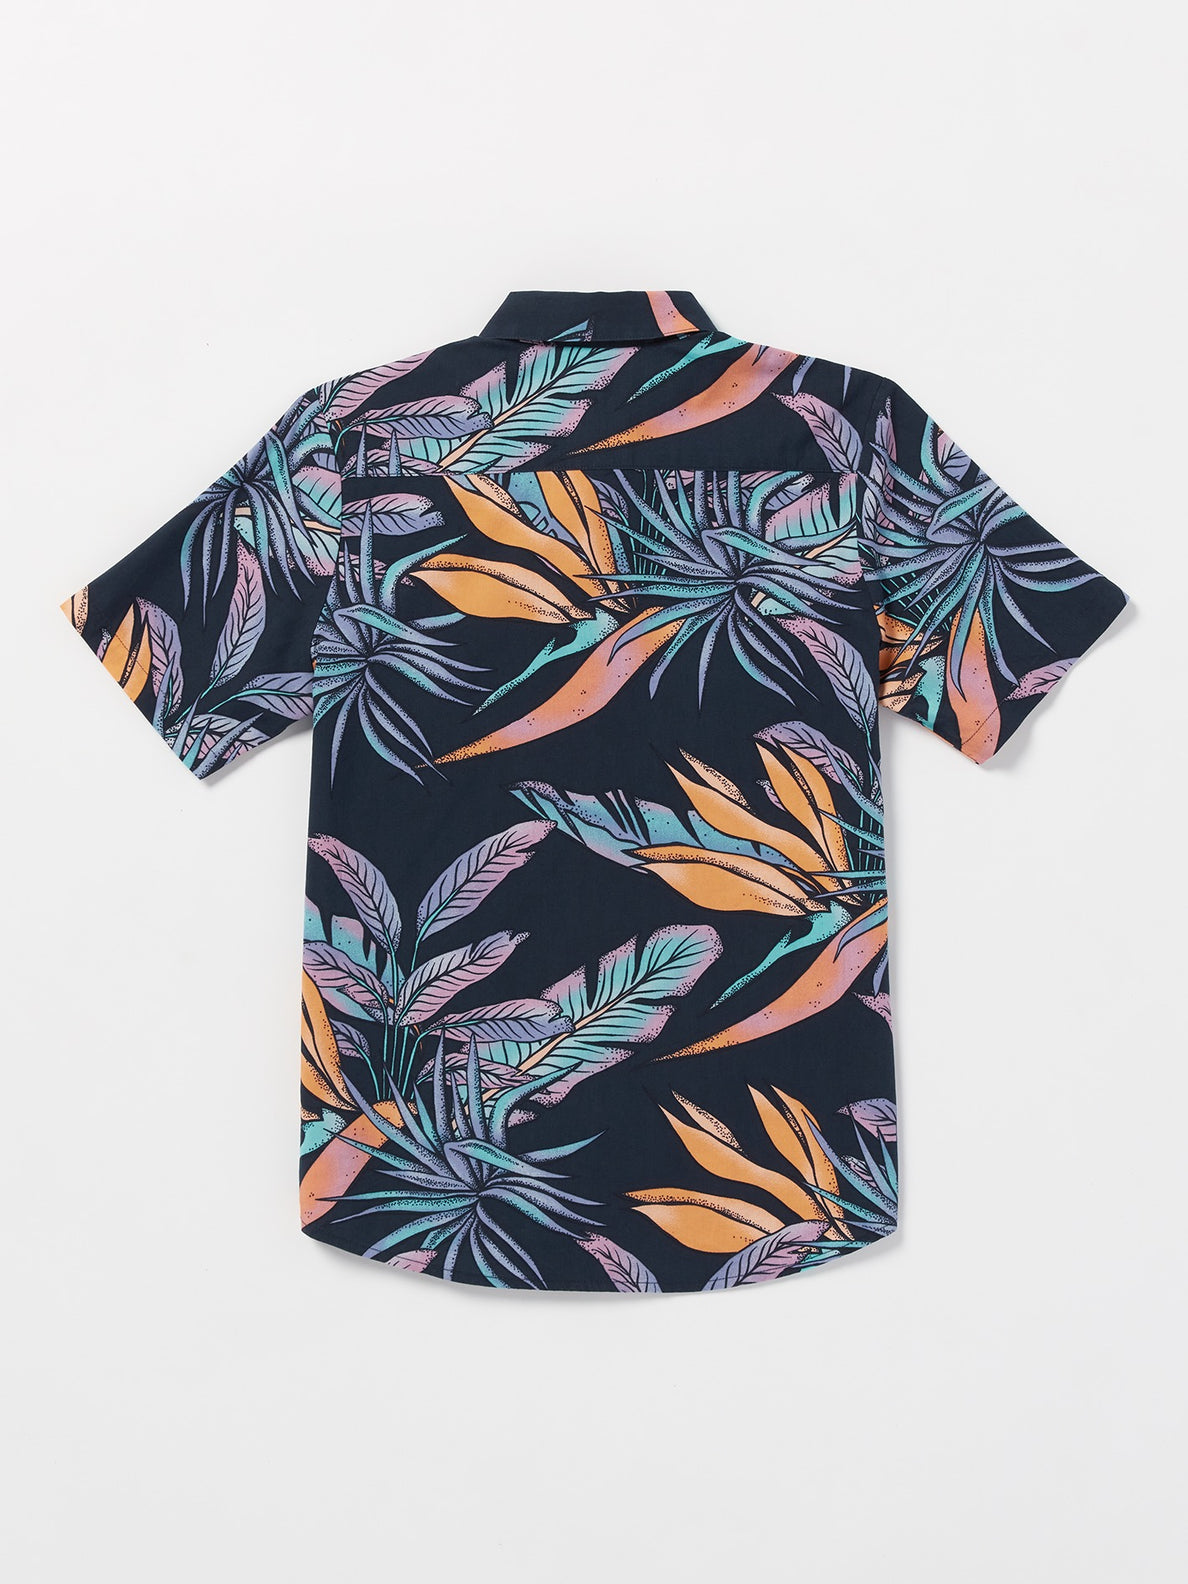 Boys Youth Indospray Floral Woven Short Sleeve Shirt - Navy